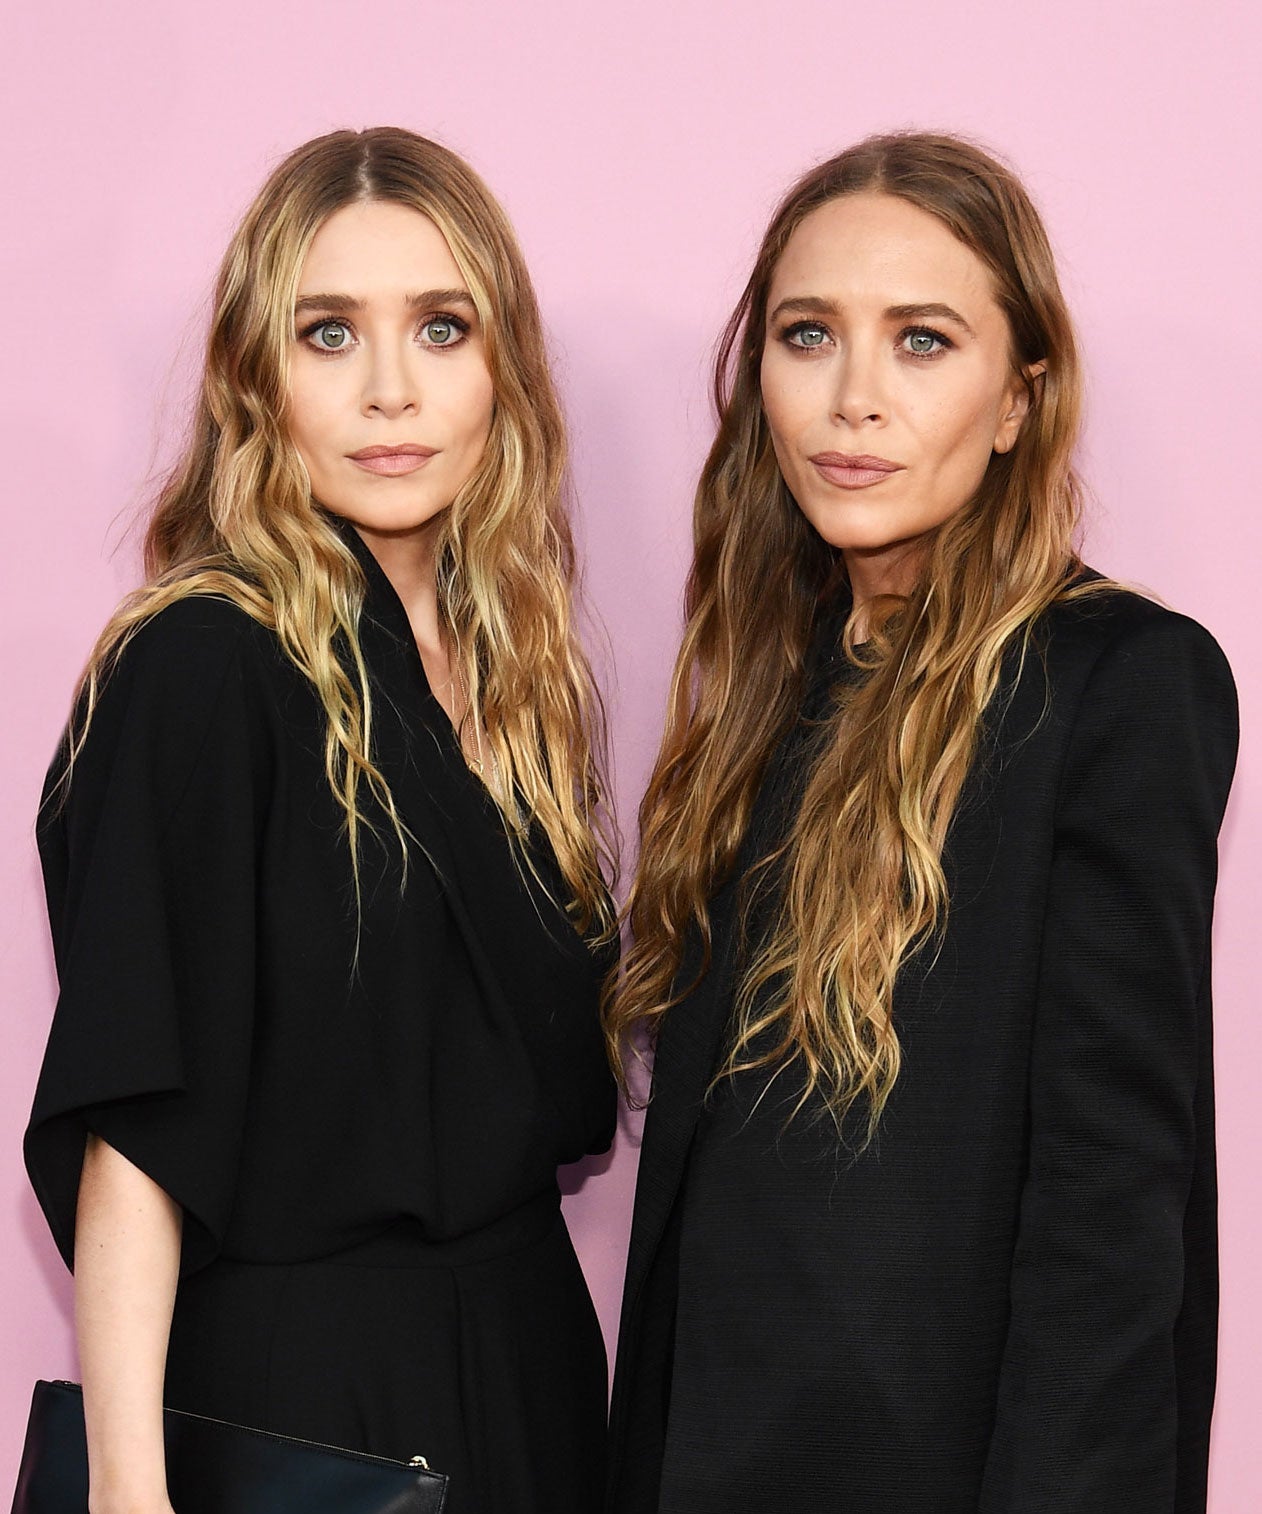 The Olsen Twins Are The Masters Of Quarantine Style